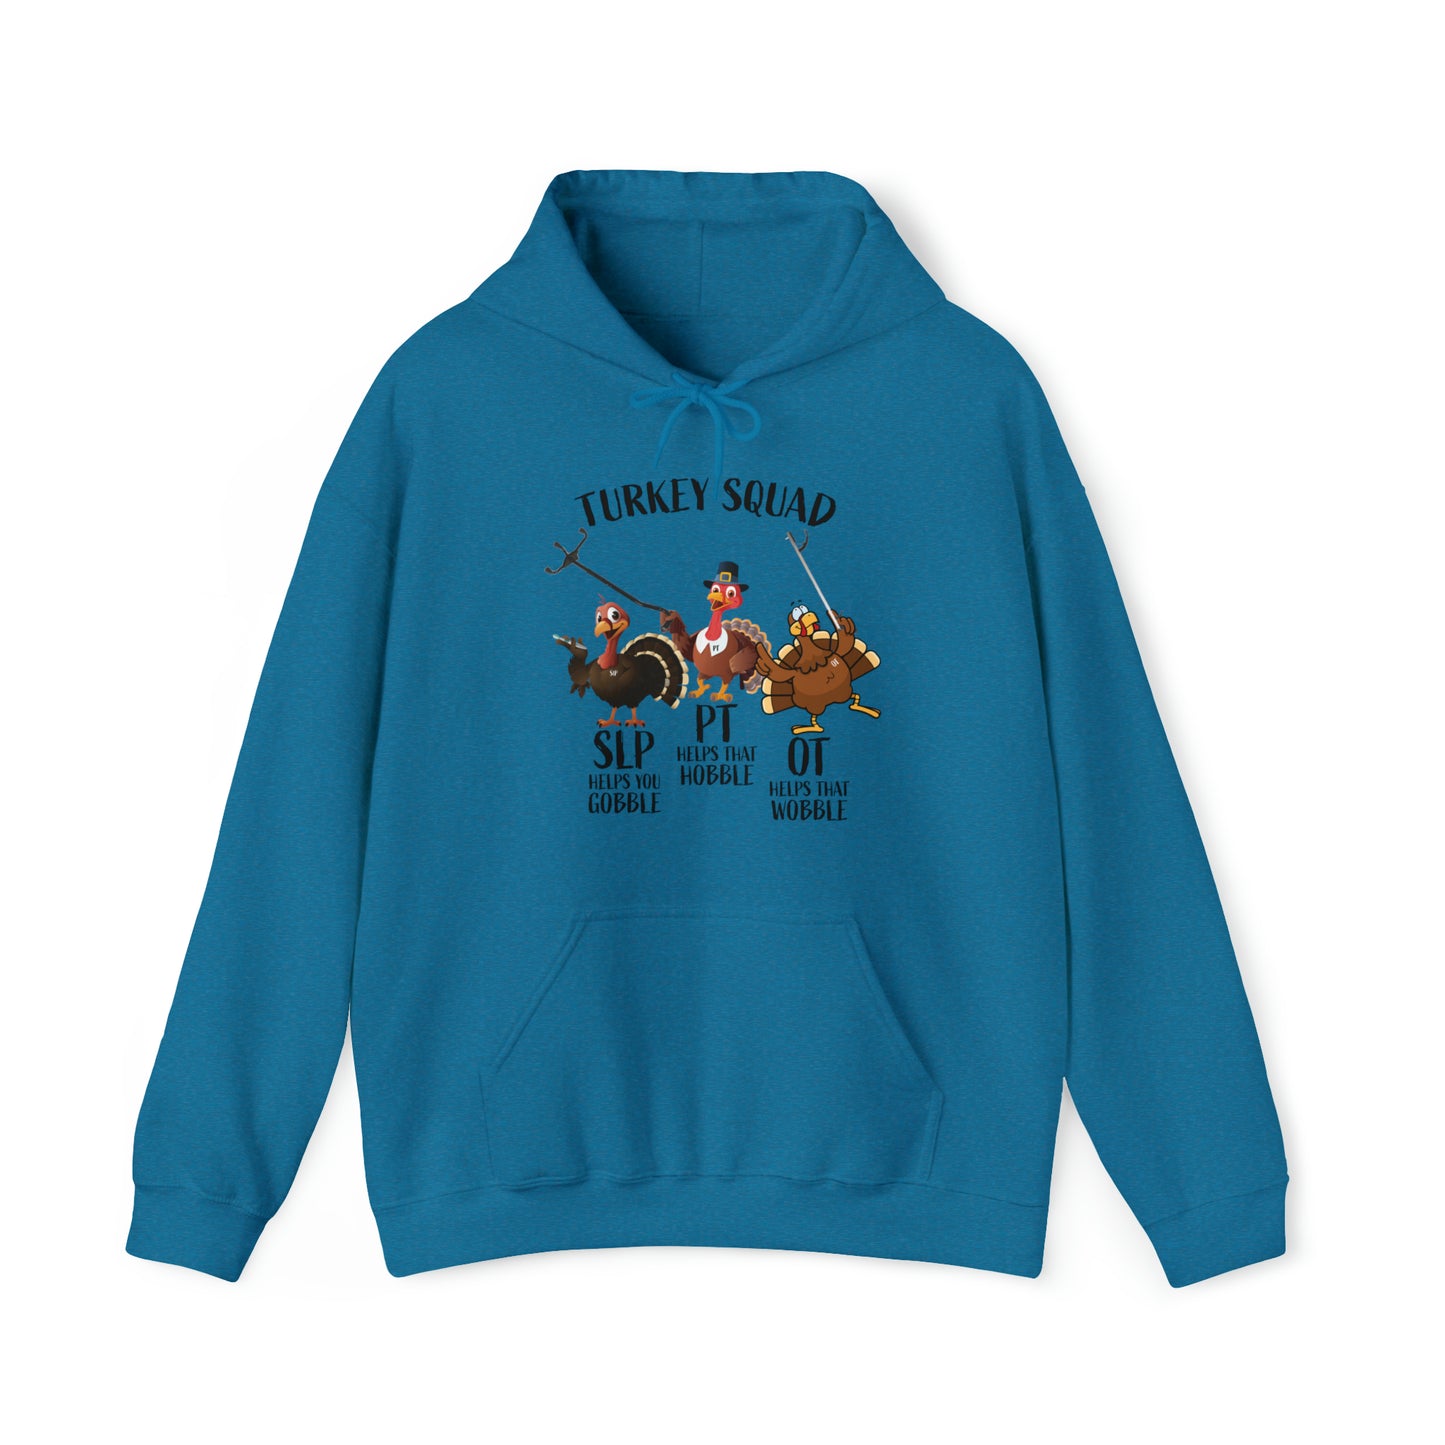 Turkey Squad, OT, PT and SLP Therapy Hoodie Halloween Fall Unisex